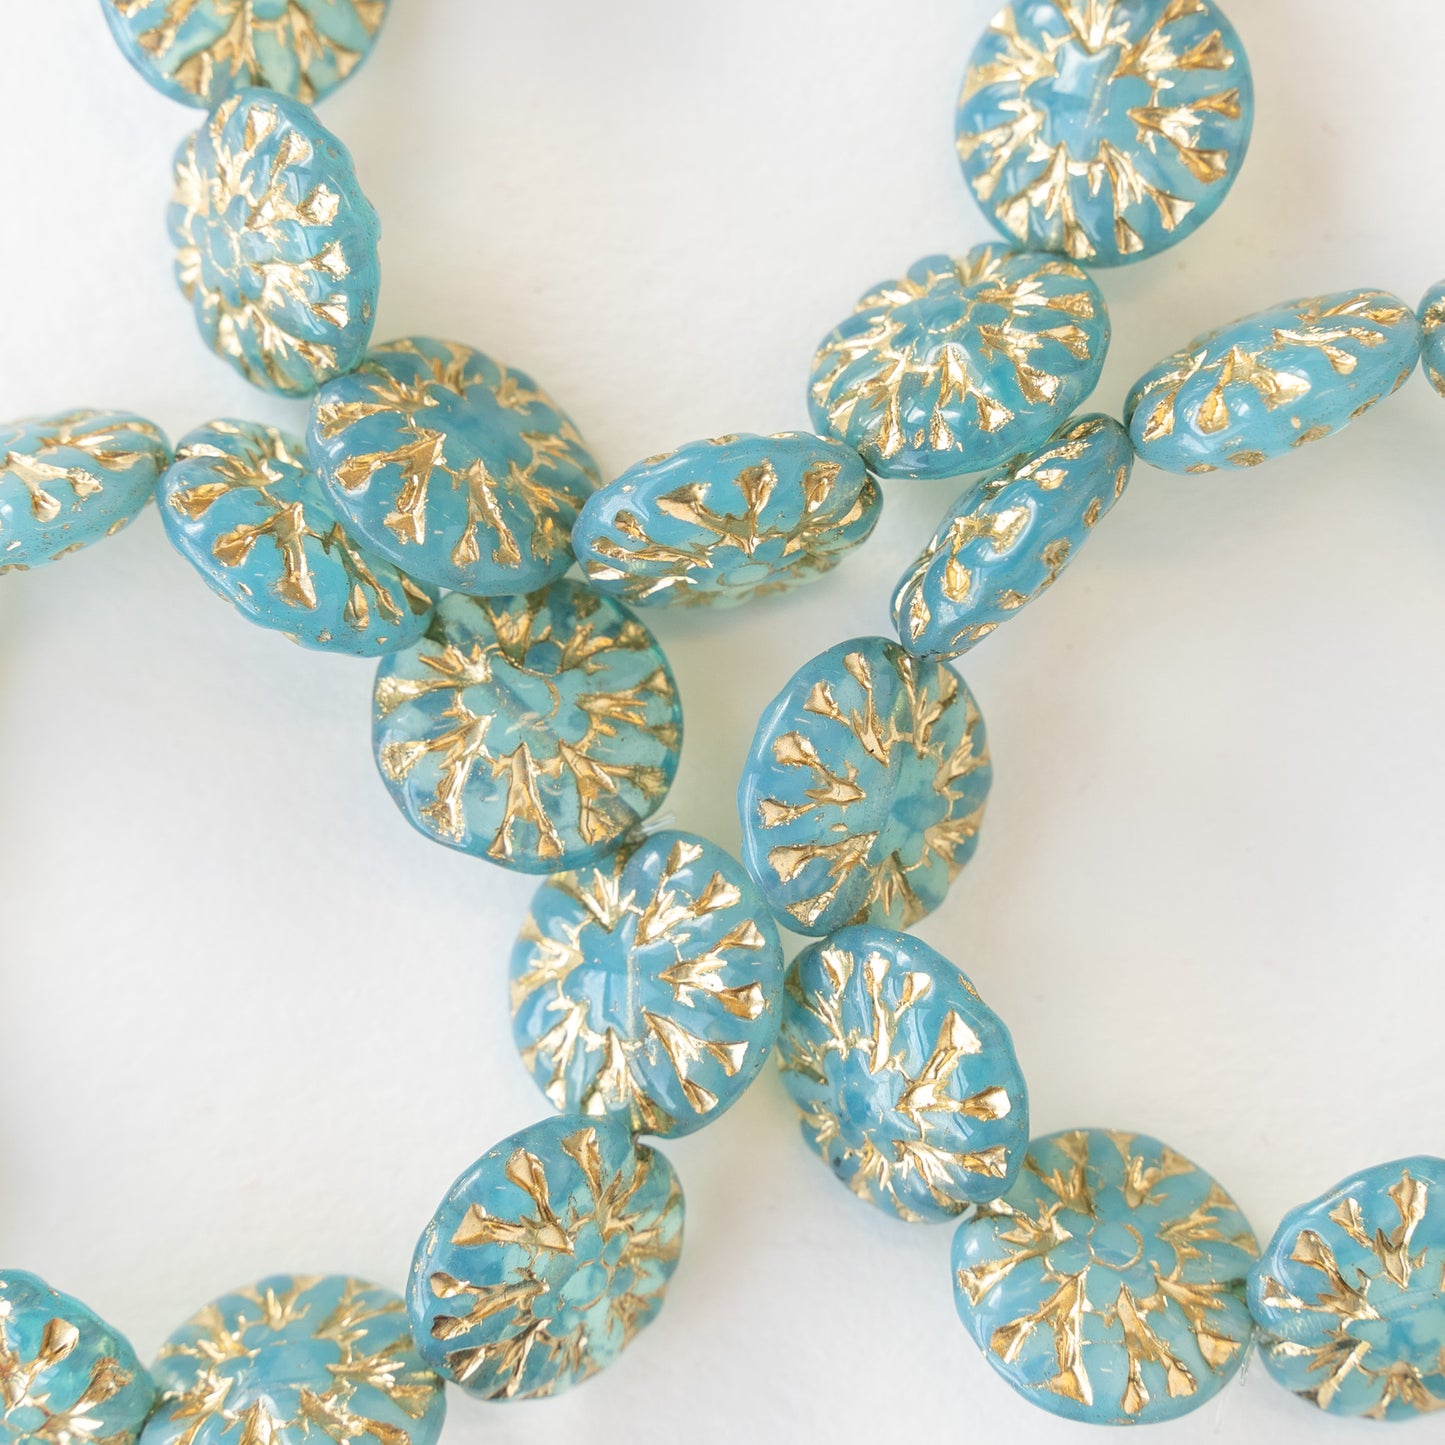 Load image into Gallery viewer, 14mm Dahlia Flower Beads - Seafoam with Aqua Wash - 10 beads
